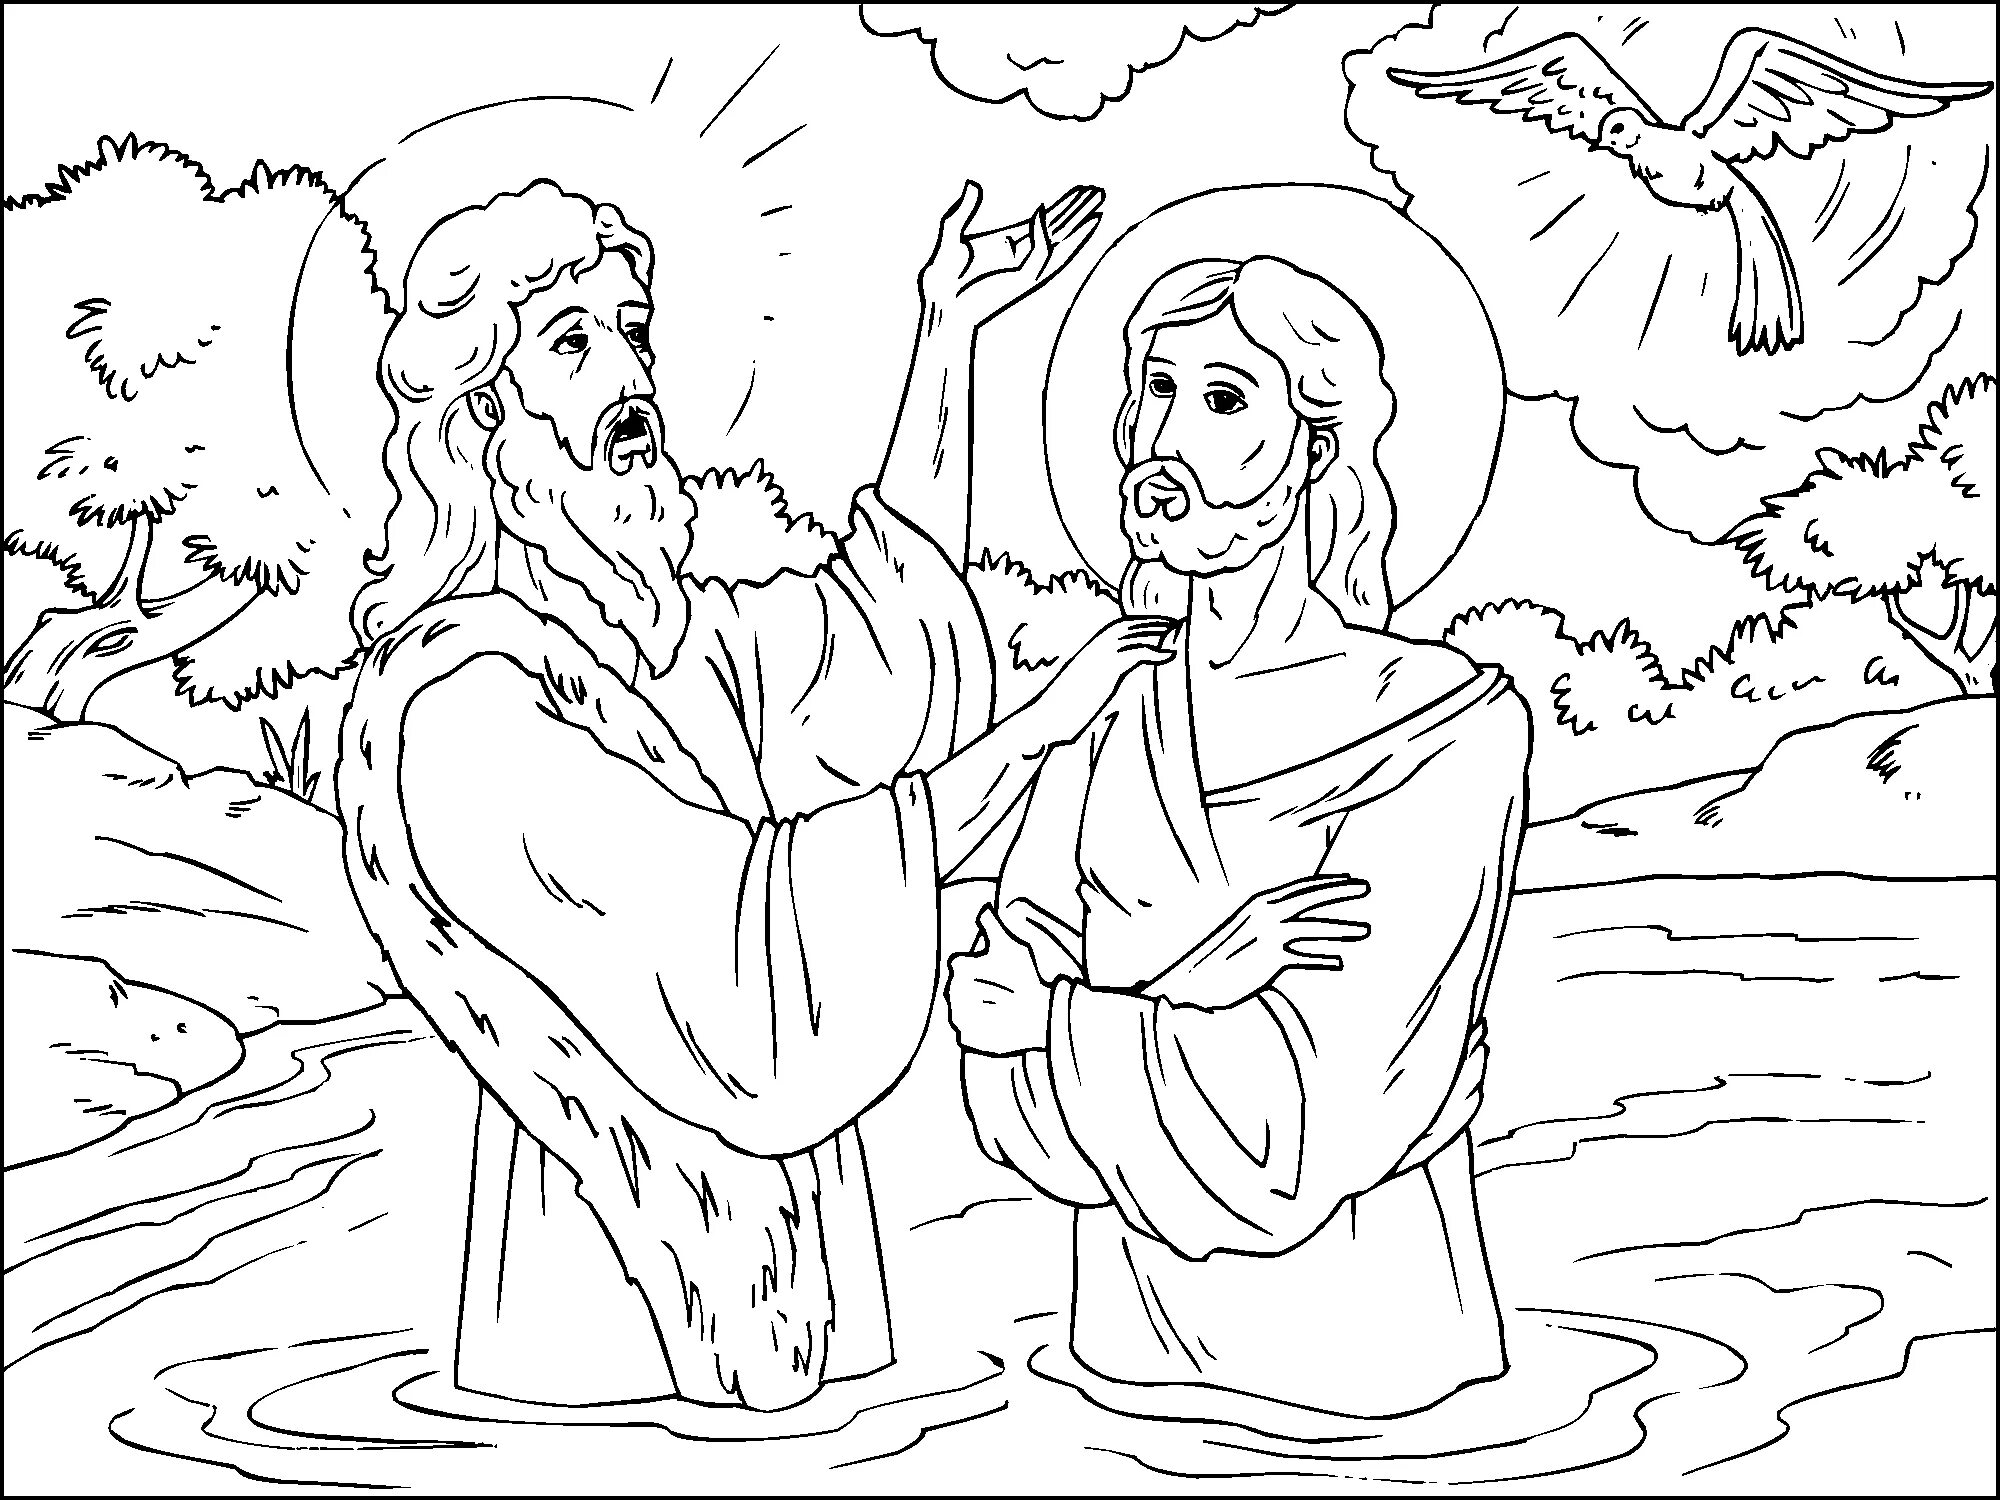 Colorful coloring of the divine baptism of Jesus